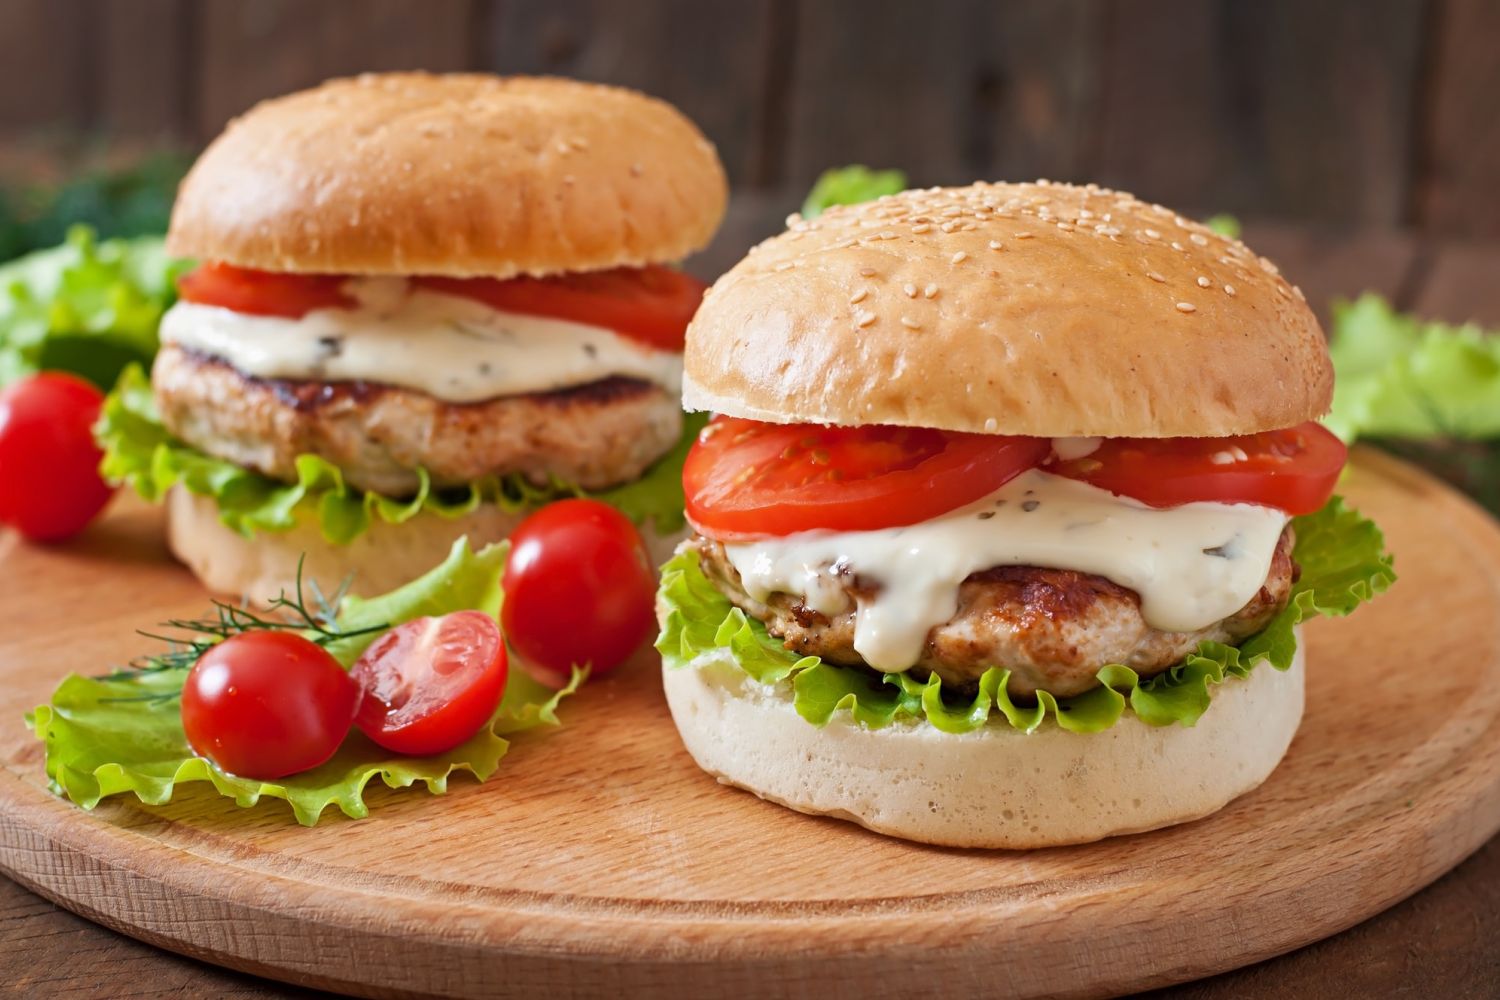 Turkey ranch burgers with a wheat bun, lettuce, and tomato.